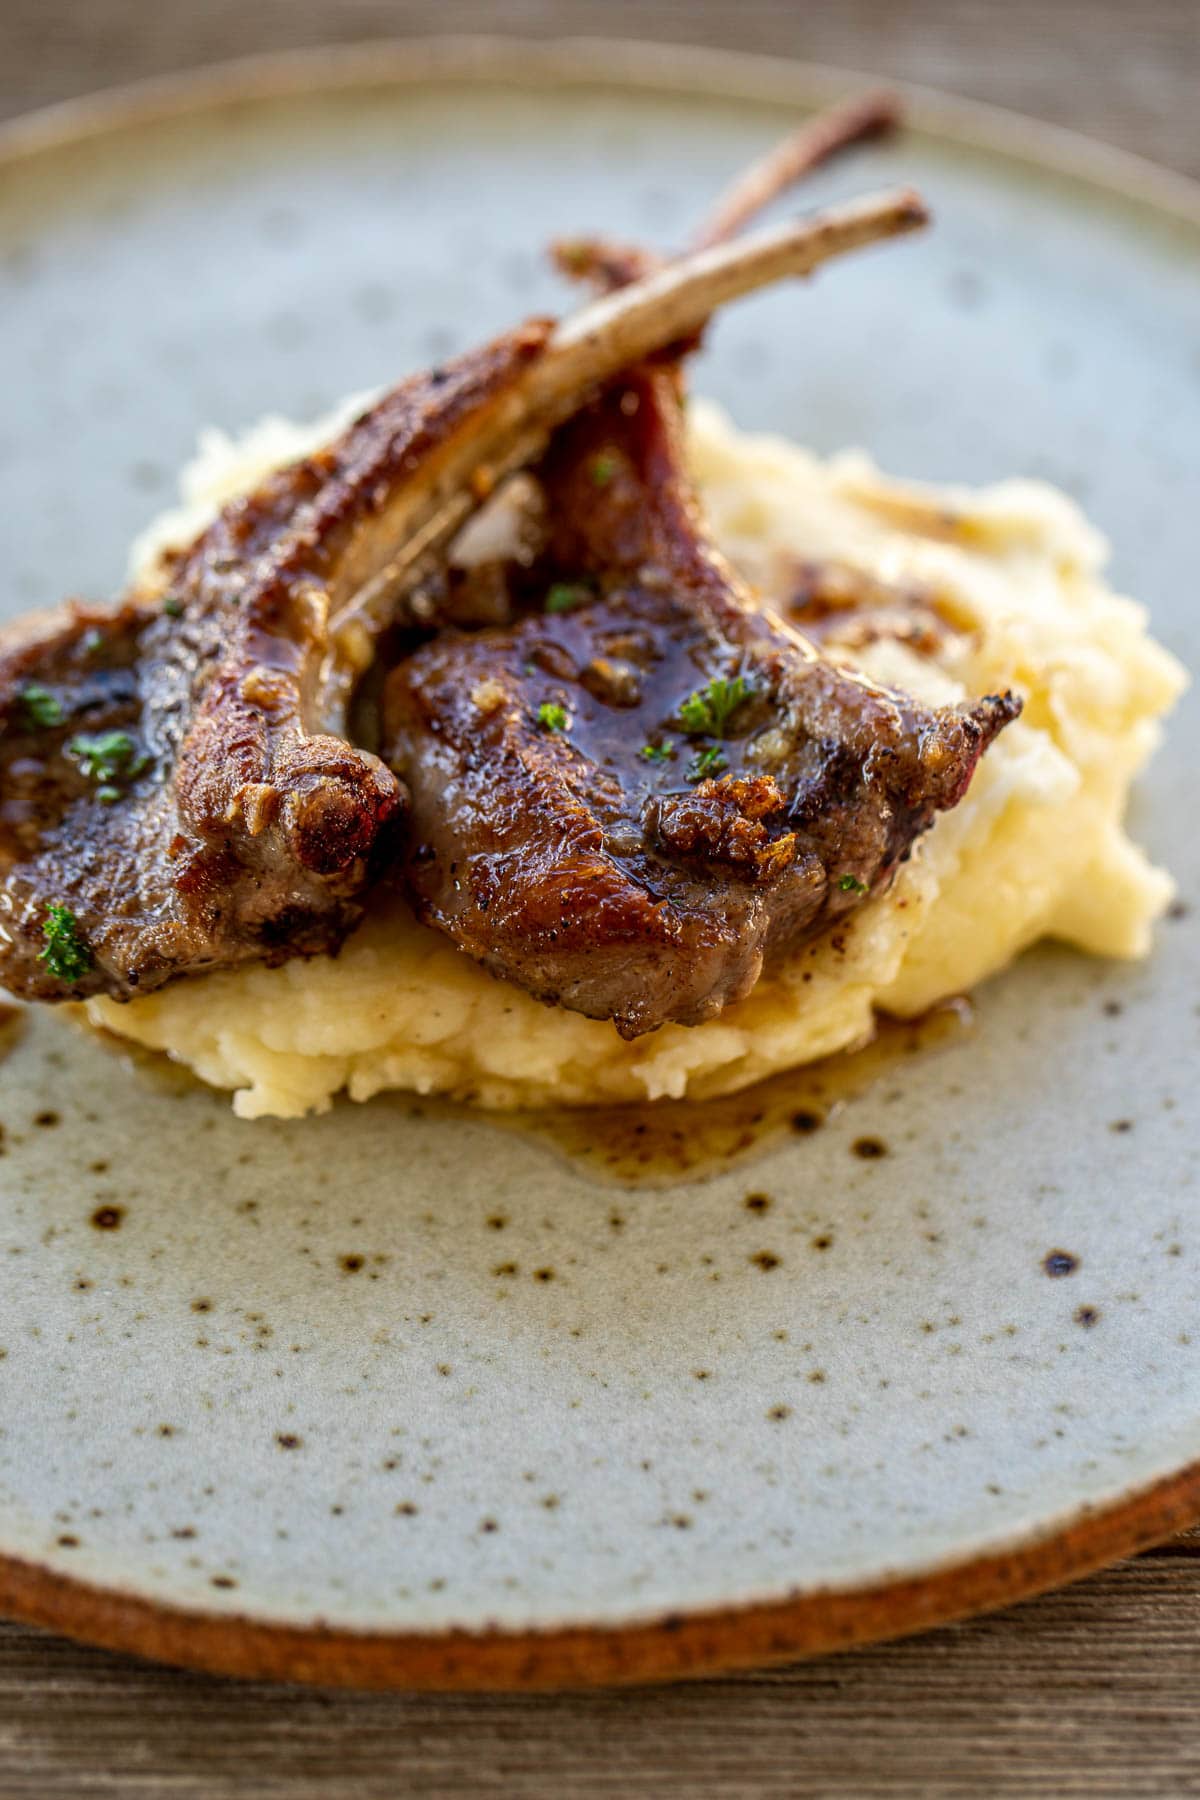 A plate with mashed potatoes and lamb chops.